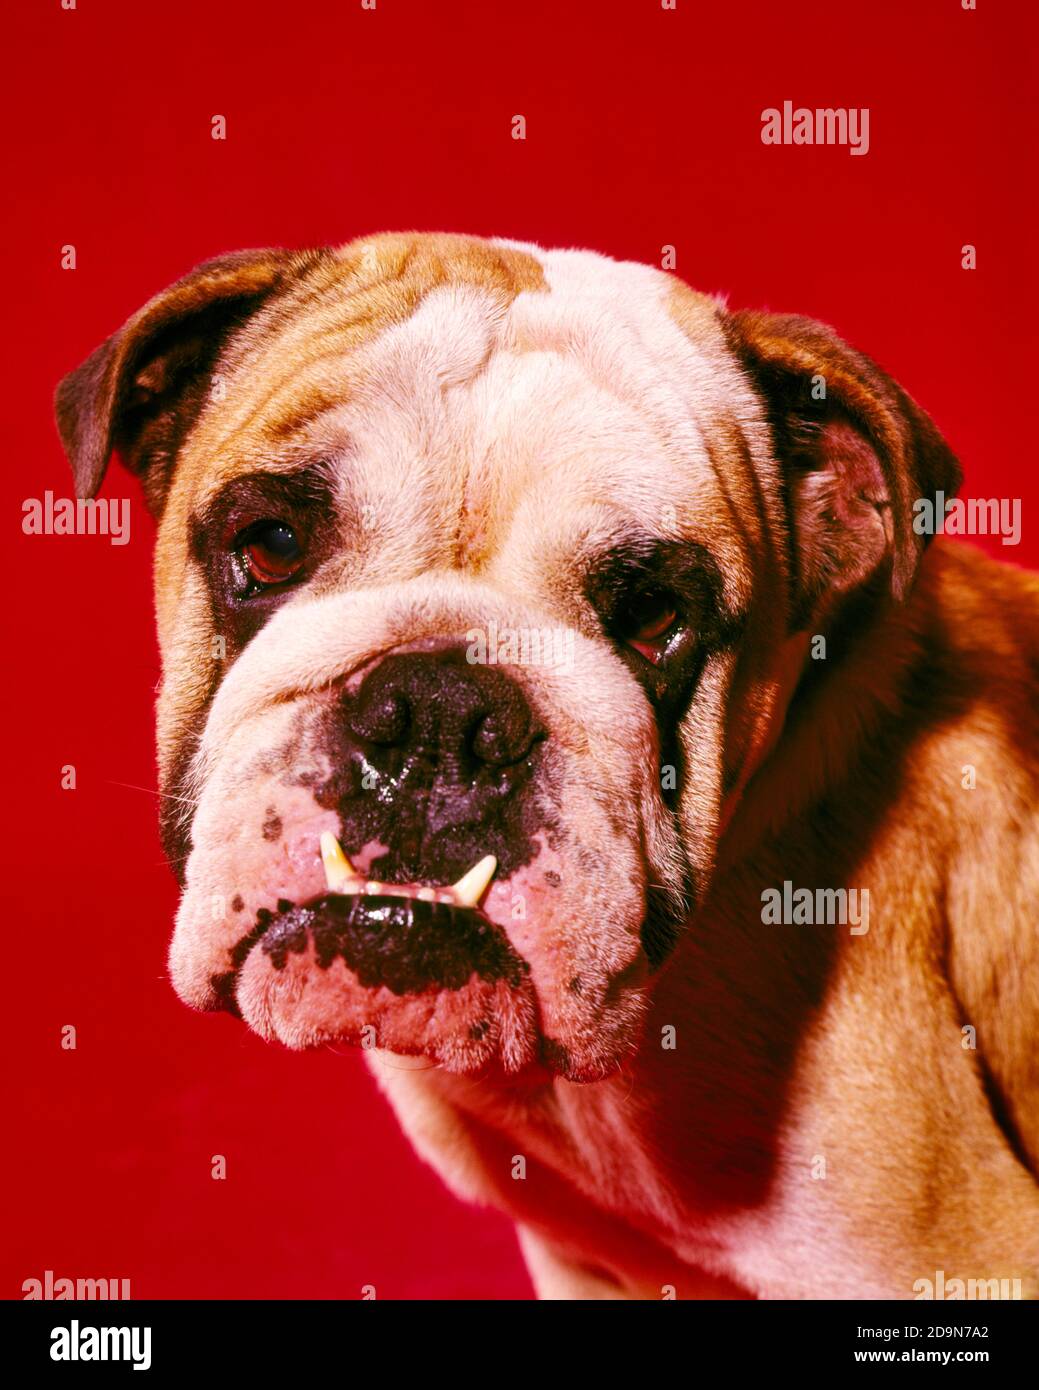 1980s 1990s FUNNY ENGLISH BULLDOG LOOKING AT CAMERA TWO BOTTOM FRONT TEETH STICKING OUT - kd2875 PHT001 HARS POOCH COMEDY ENGLISH BULLDOG CANINE MAMMAL MISERABLE TOUGH OLD FASHIONED Stock Photo